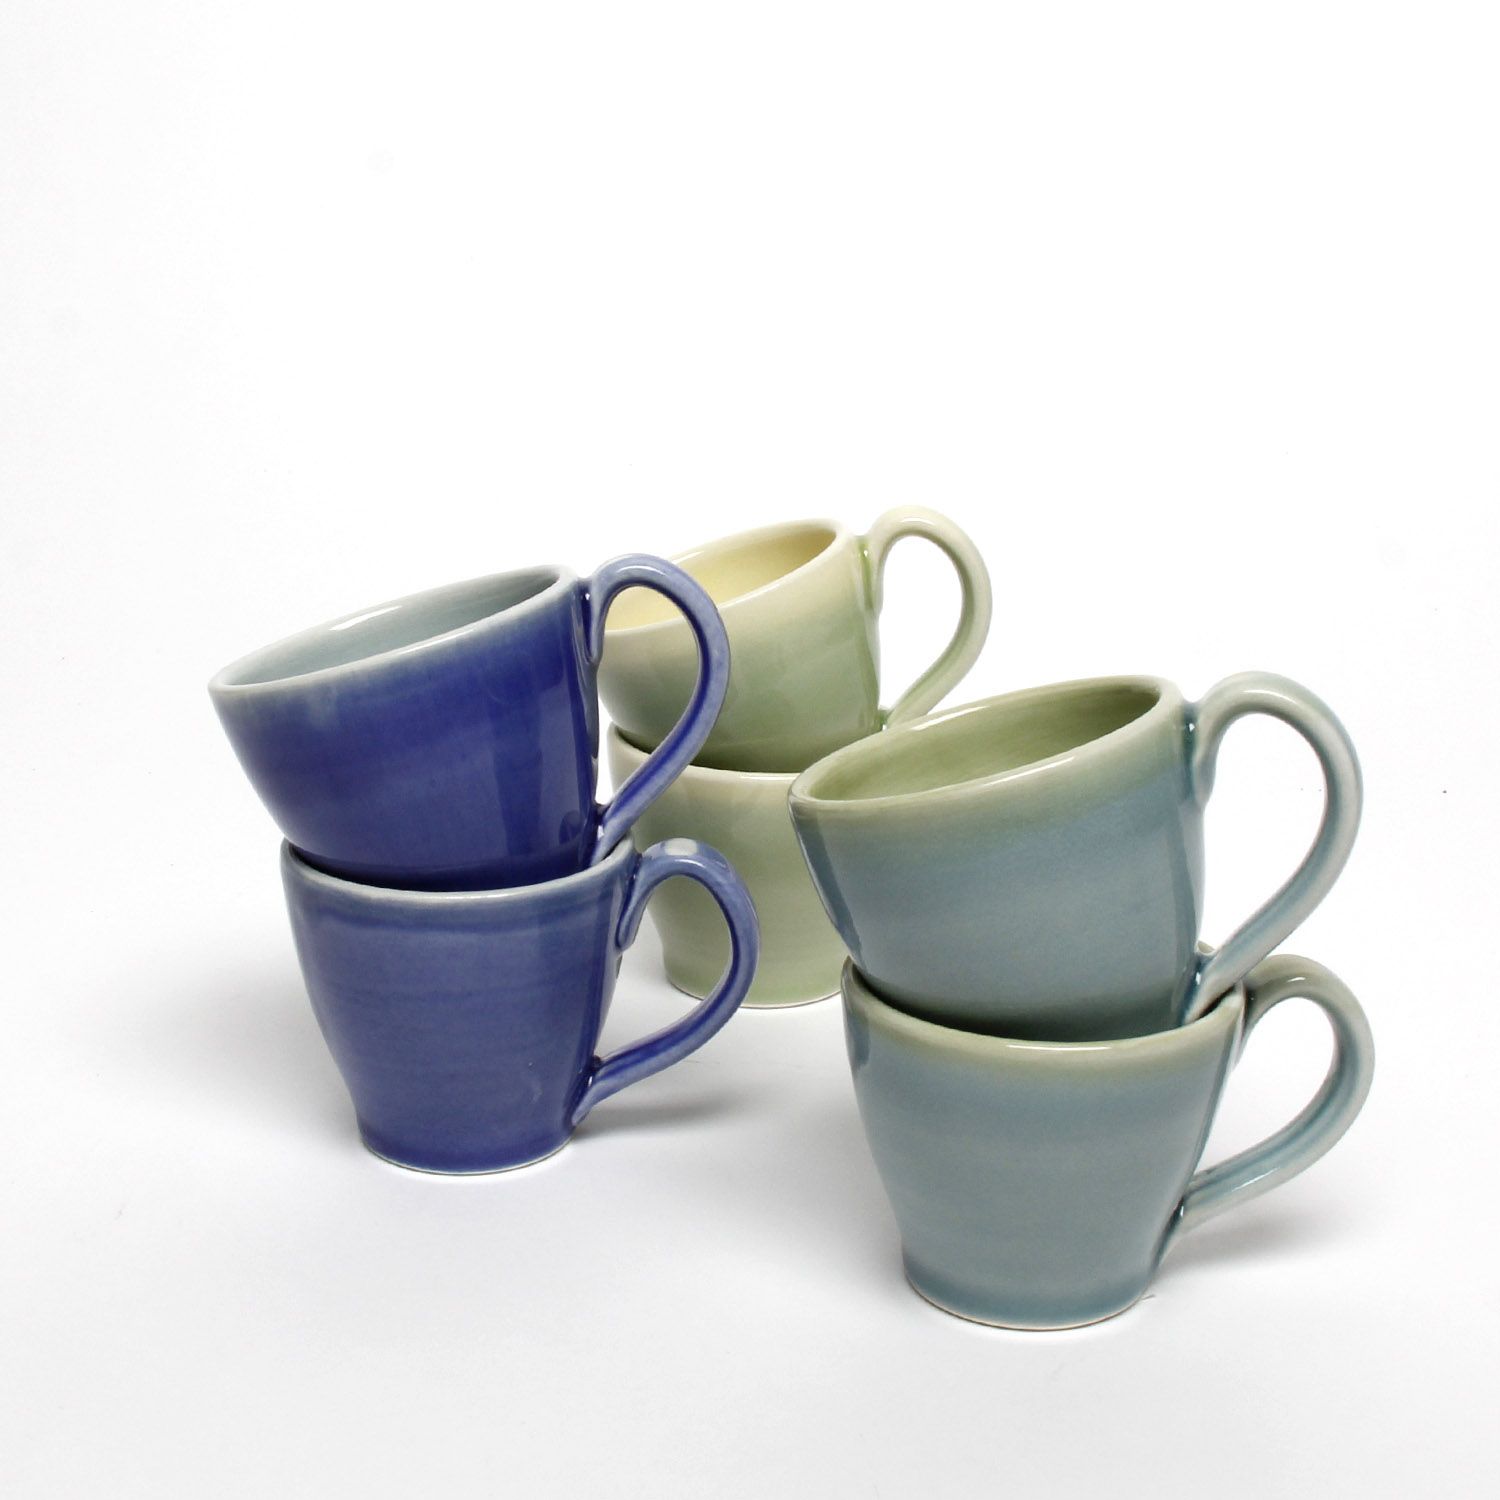 Thomas Aitken: Green Espresso Cup Product Image 2 of 5